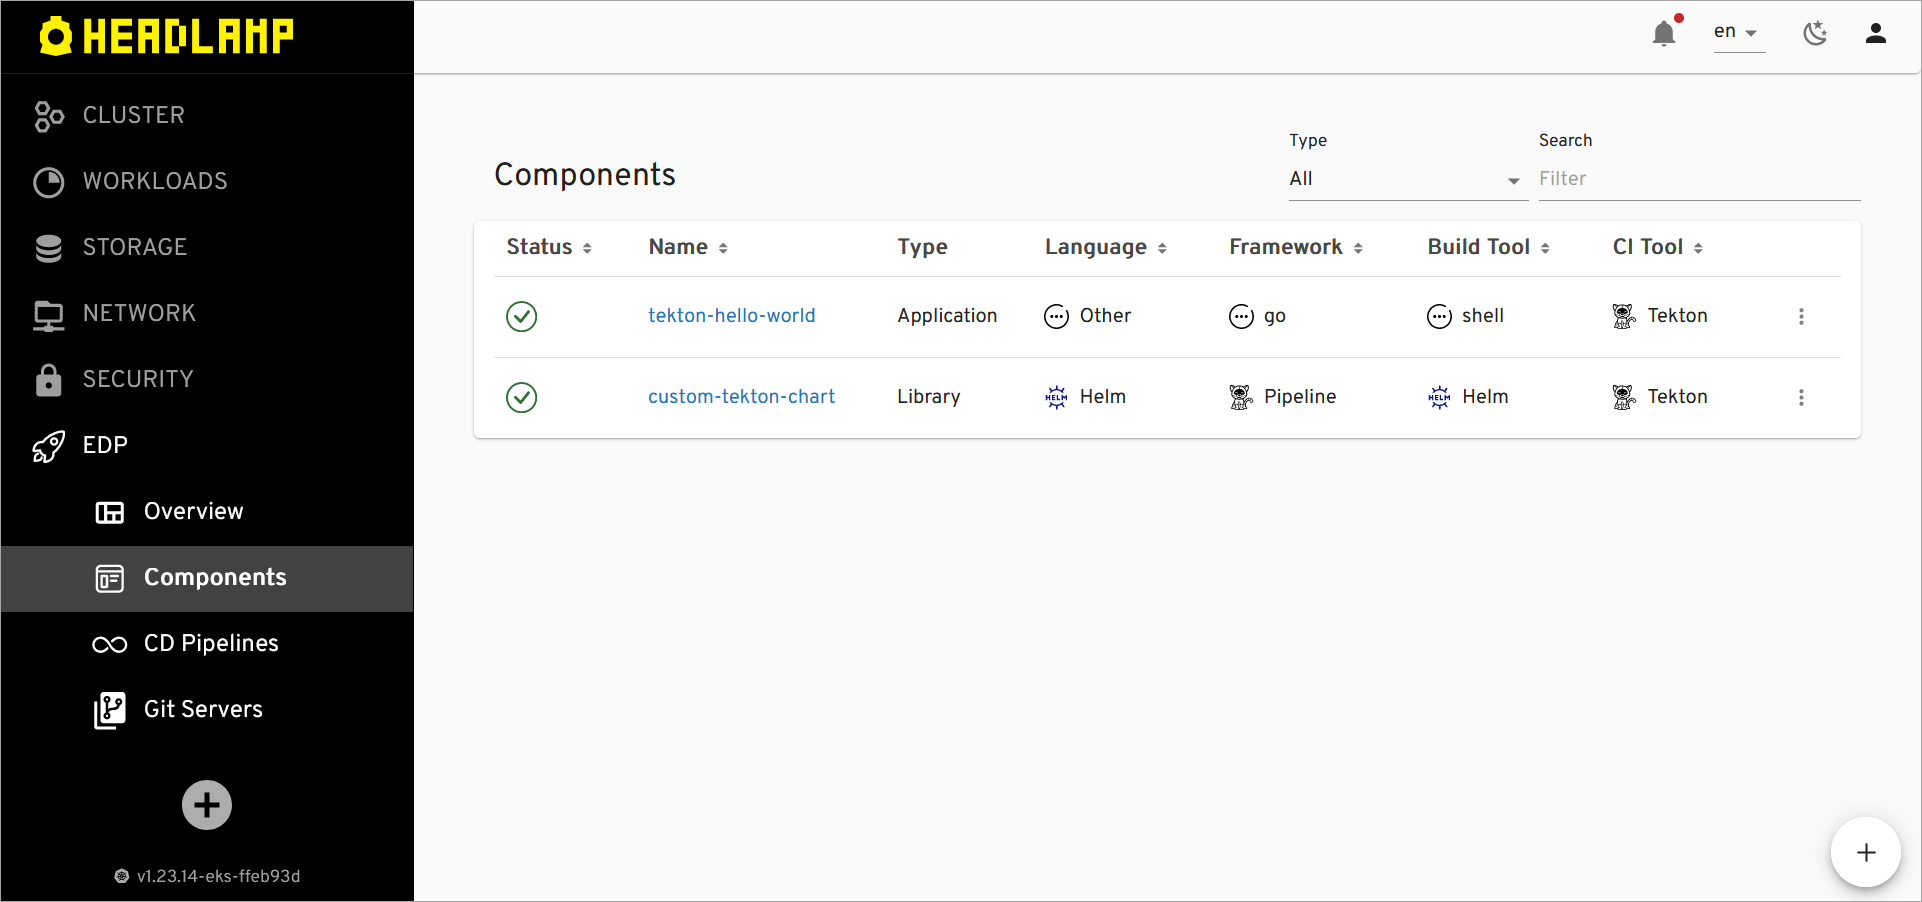 Components overview page